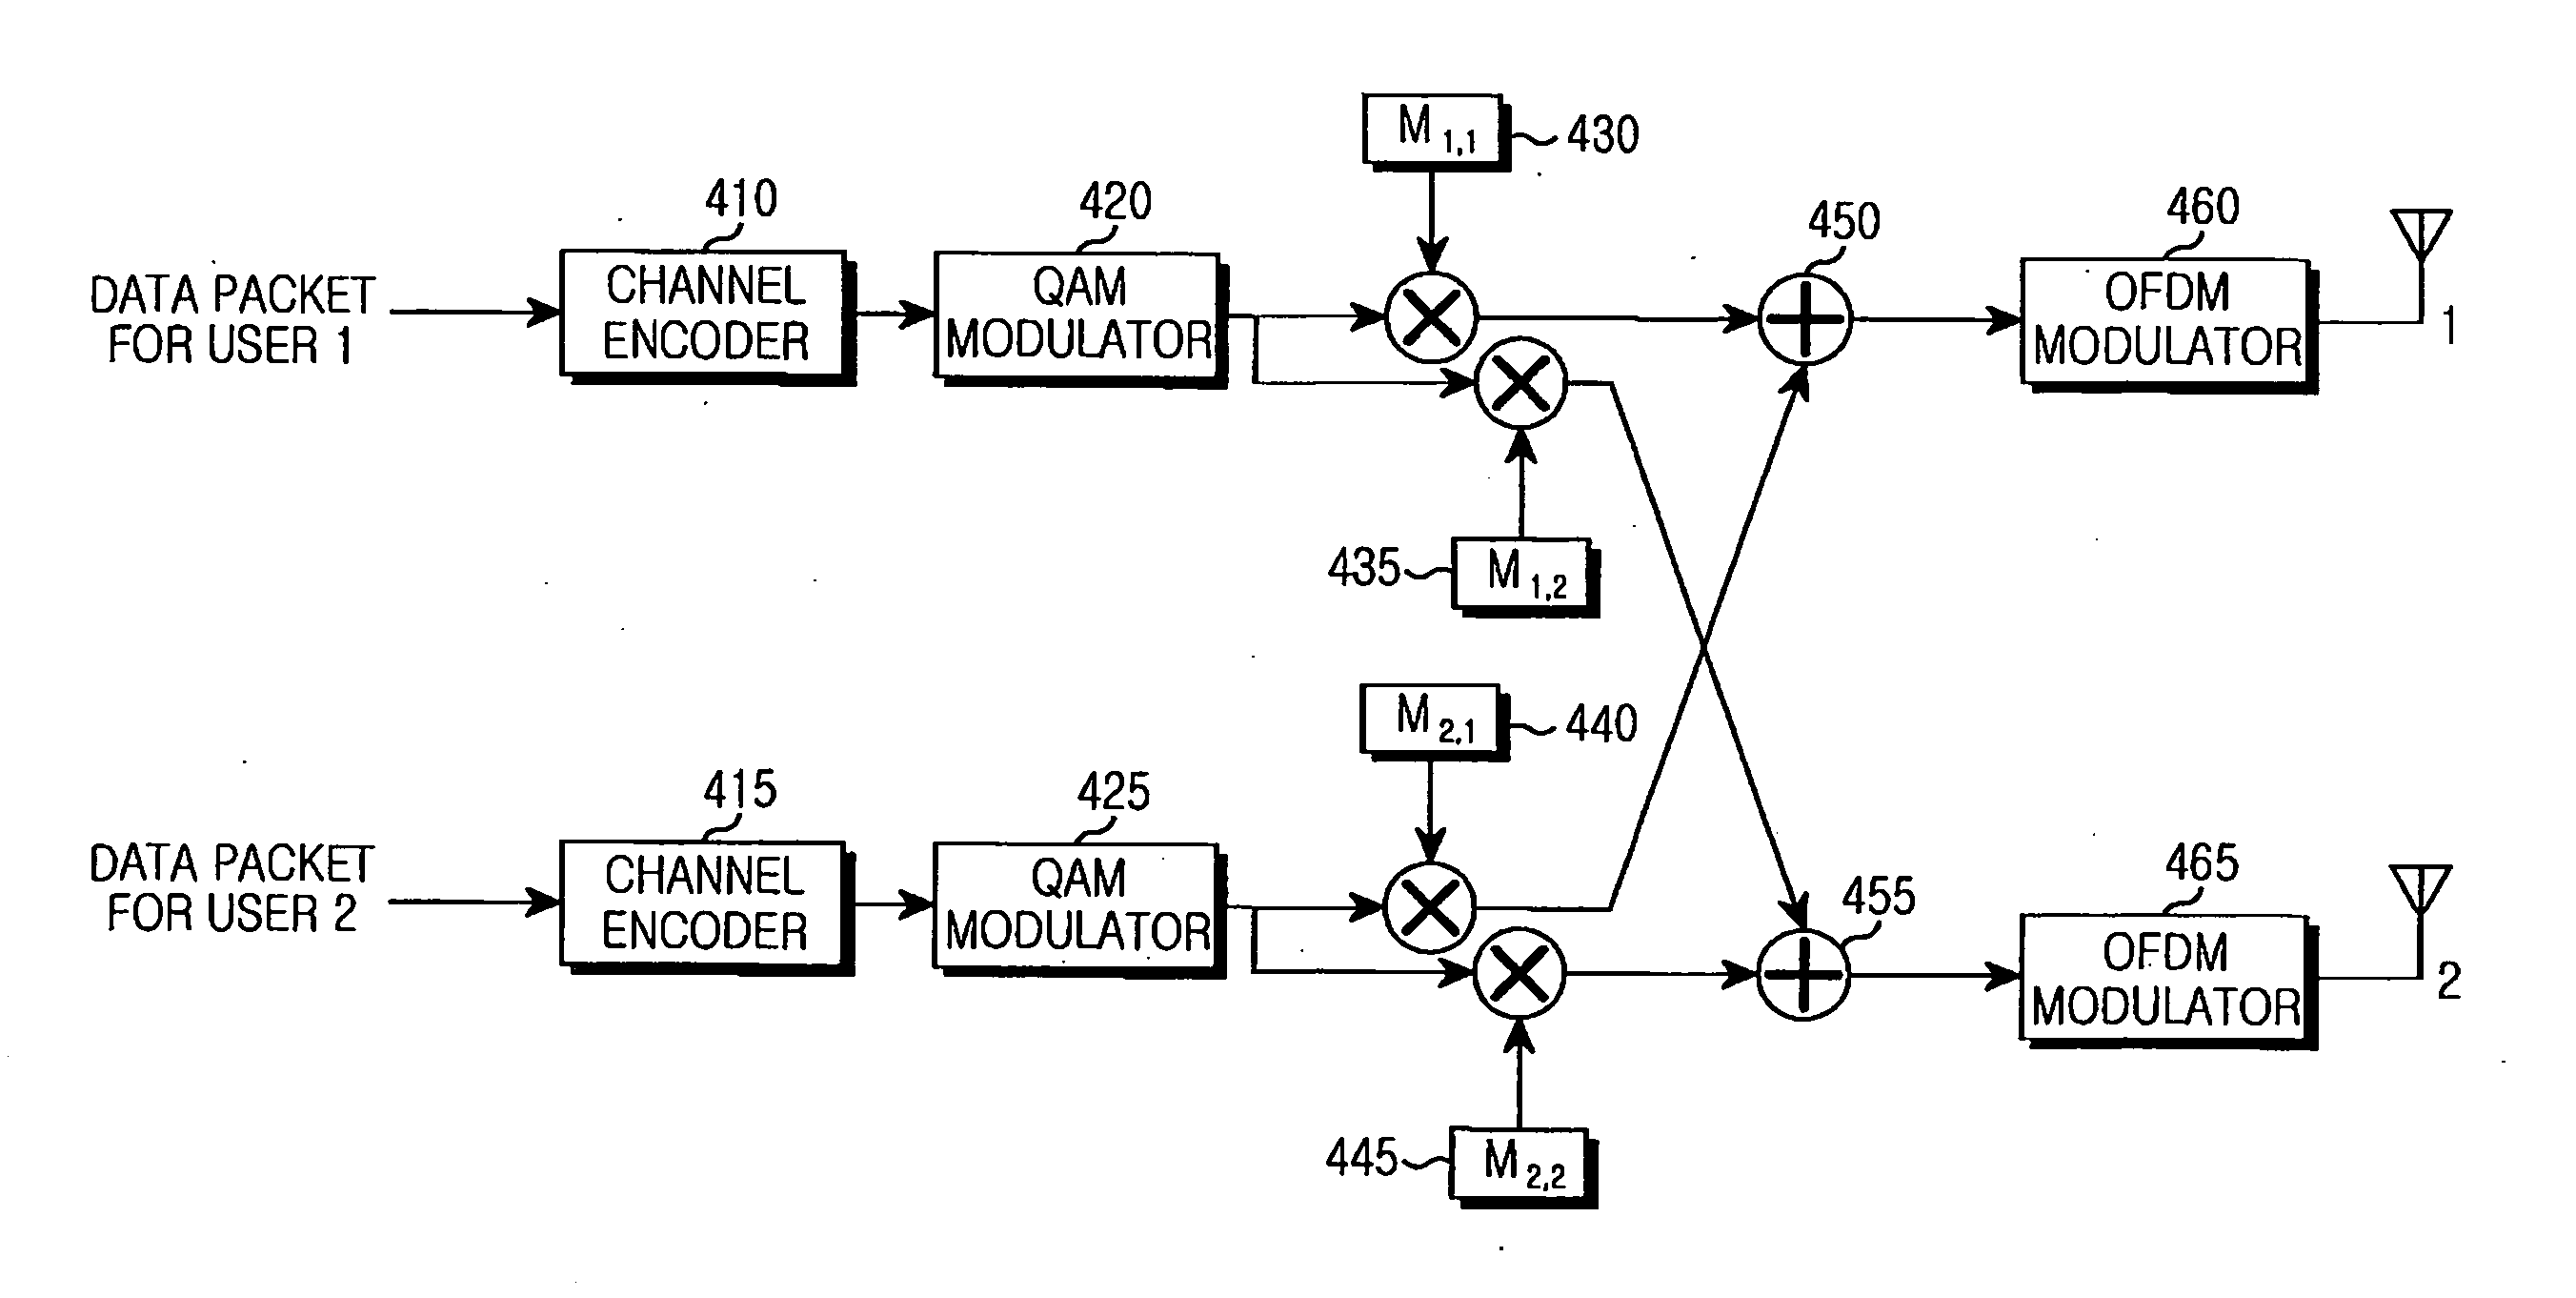 Apparatus and method for transmission and reception in a multi-user MIMO communication system